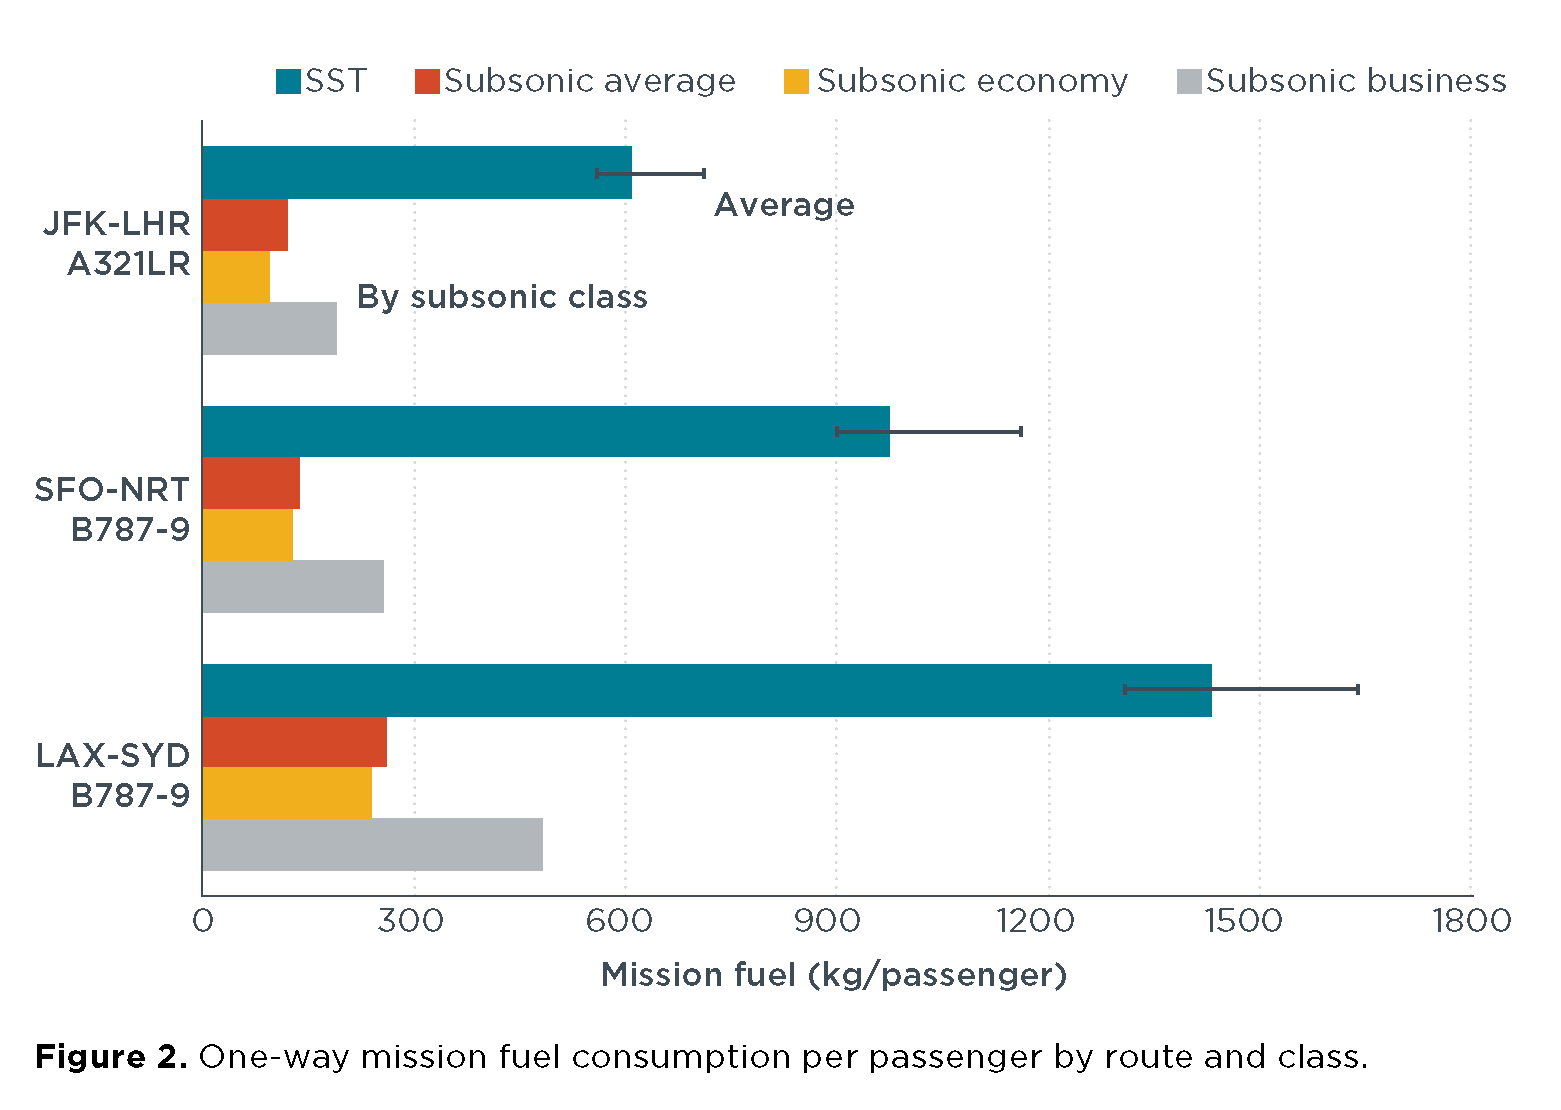 One-way fuel consumption per passenger by route and class